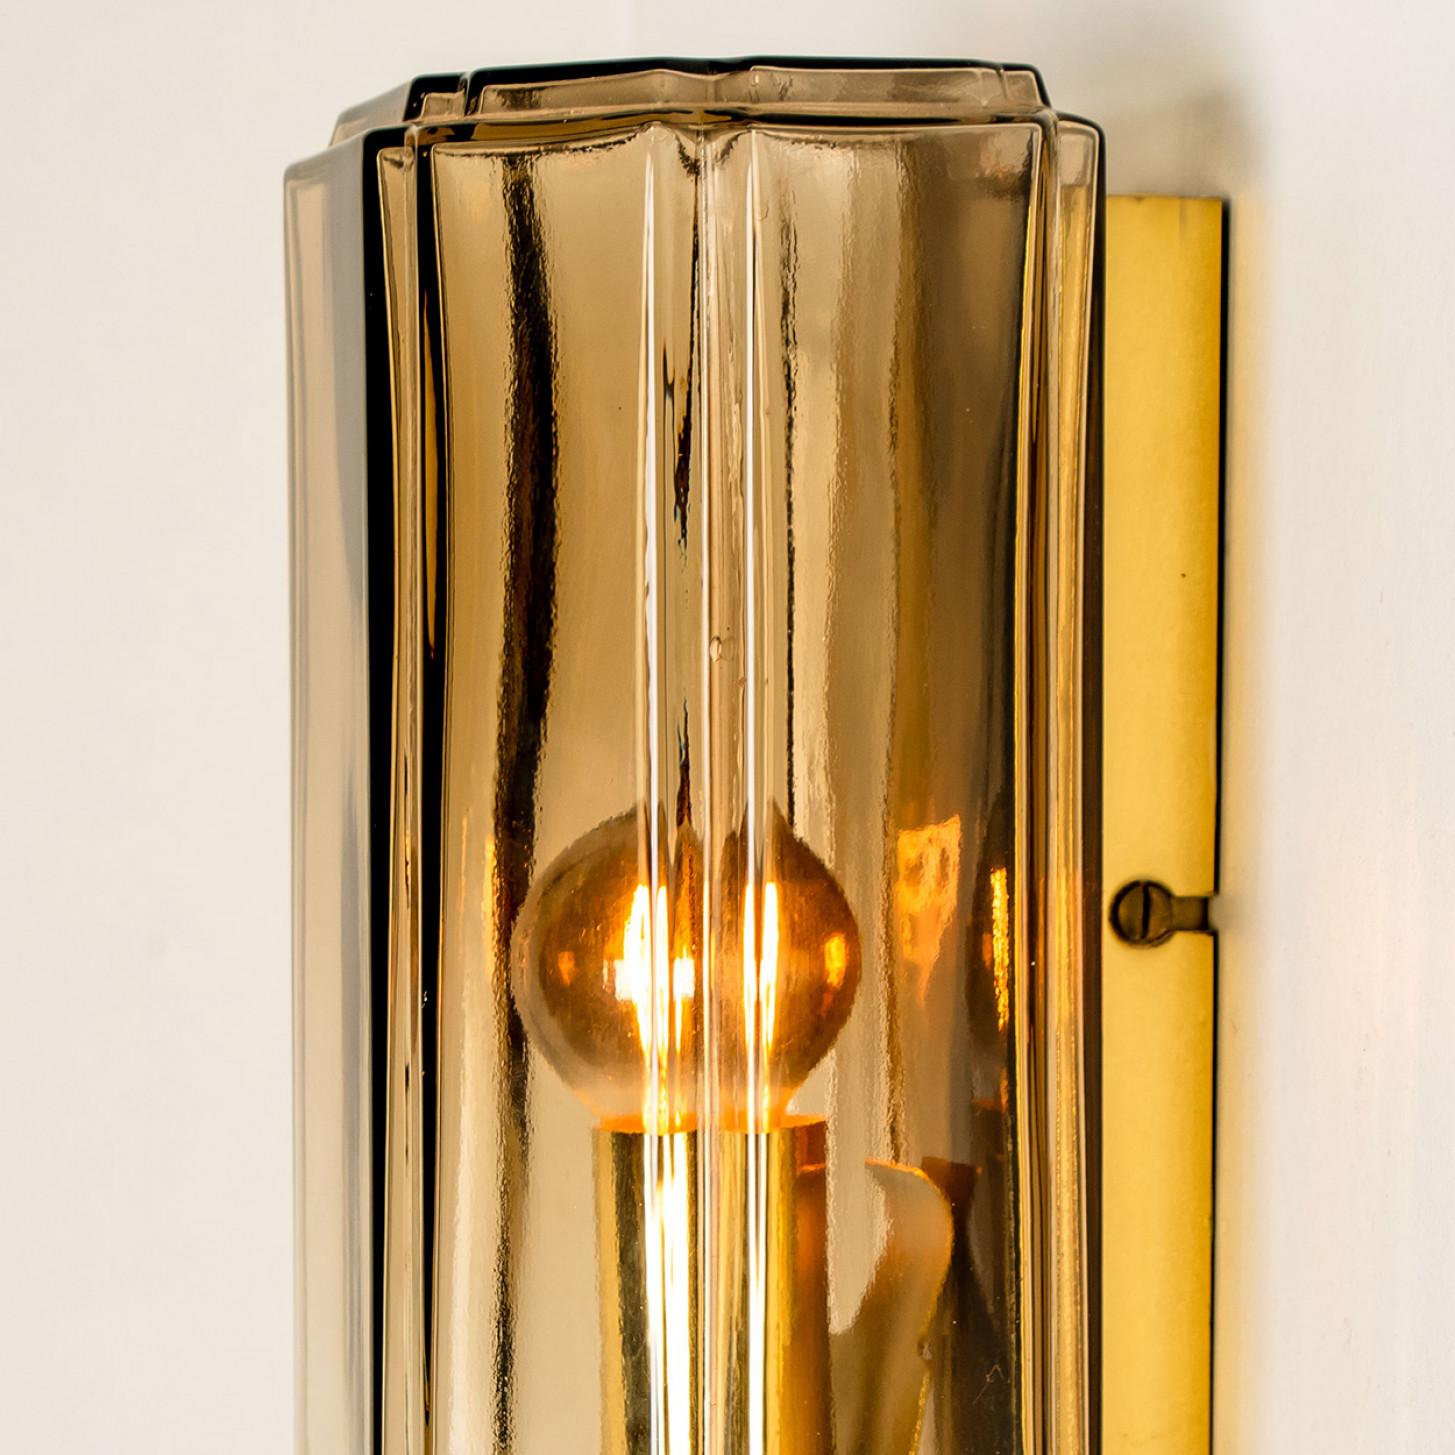 Several Smoked Glass Wall Lights Sconces by Glashütte Limburg, Germany, 1960 For Sale 3